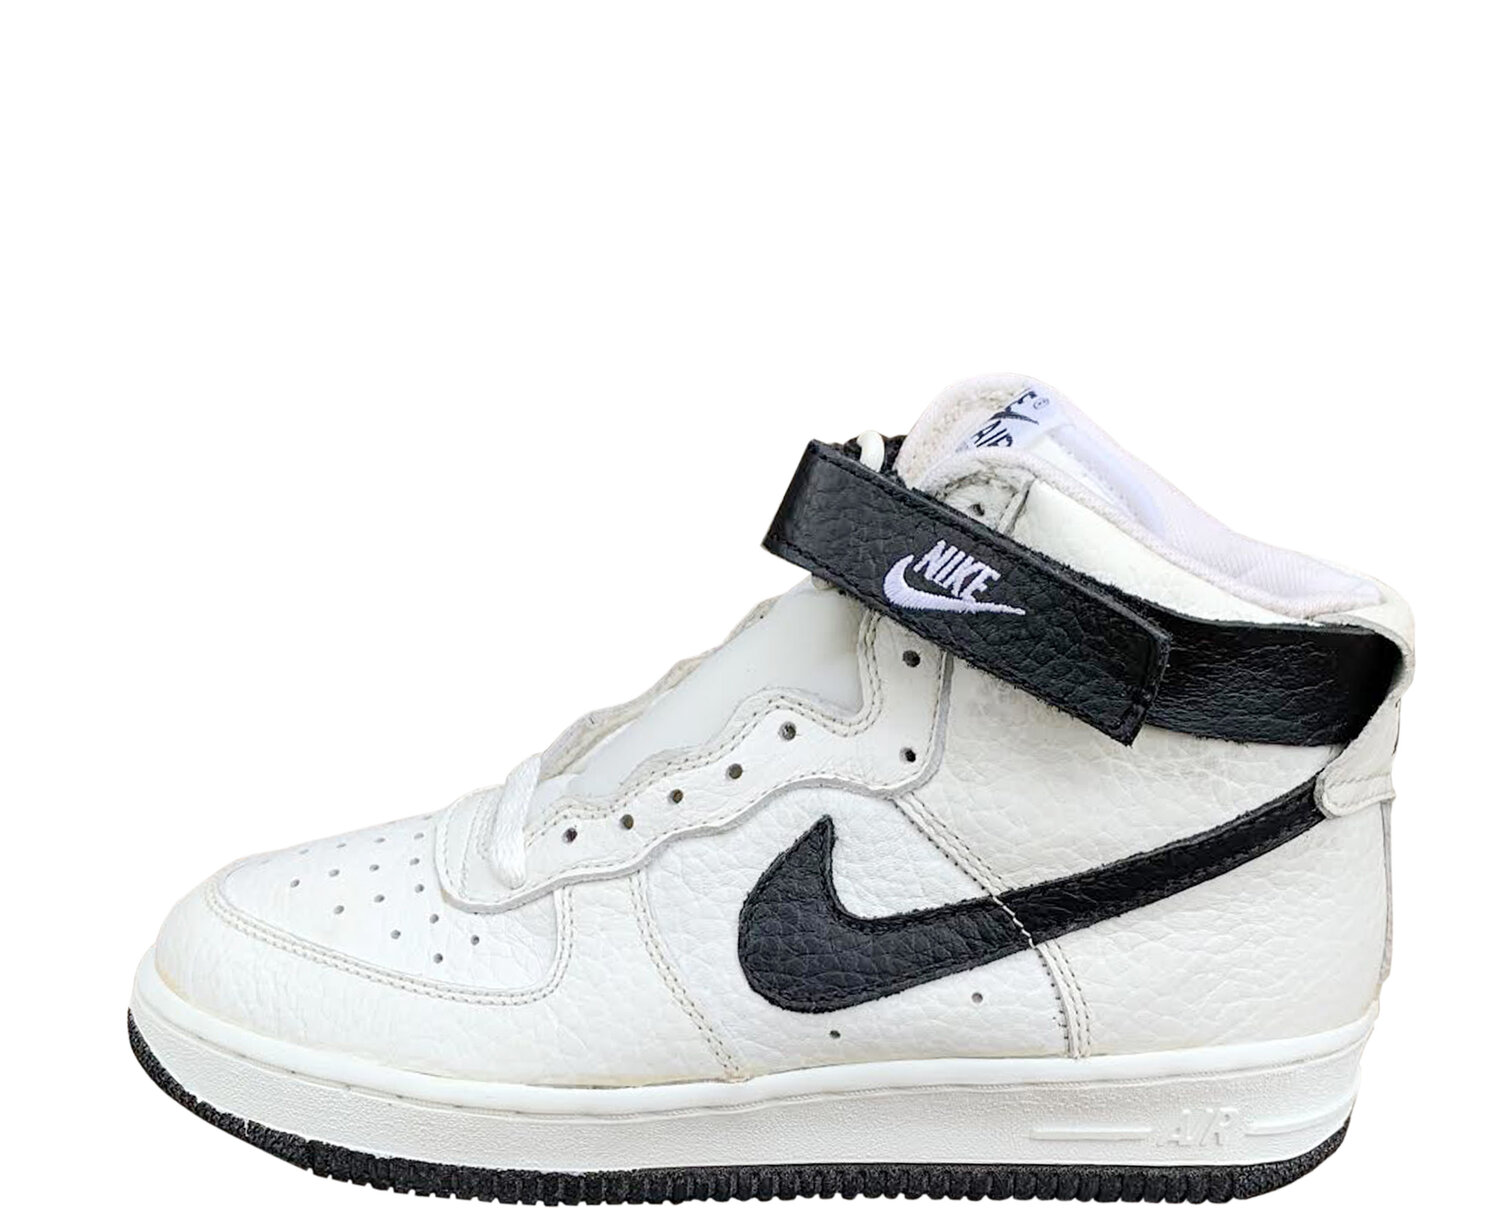 Pair Of High-top Classic Nike AF-1 Air Force 1 White Leather